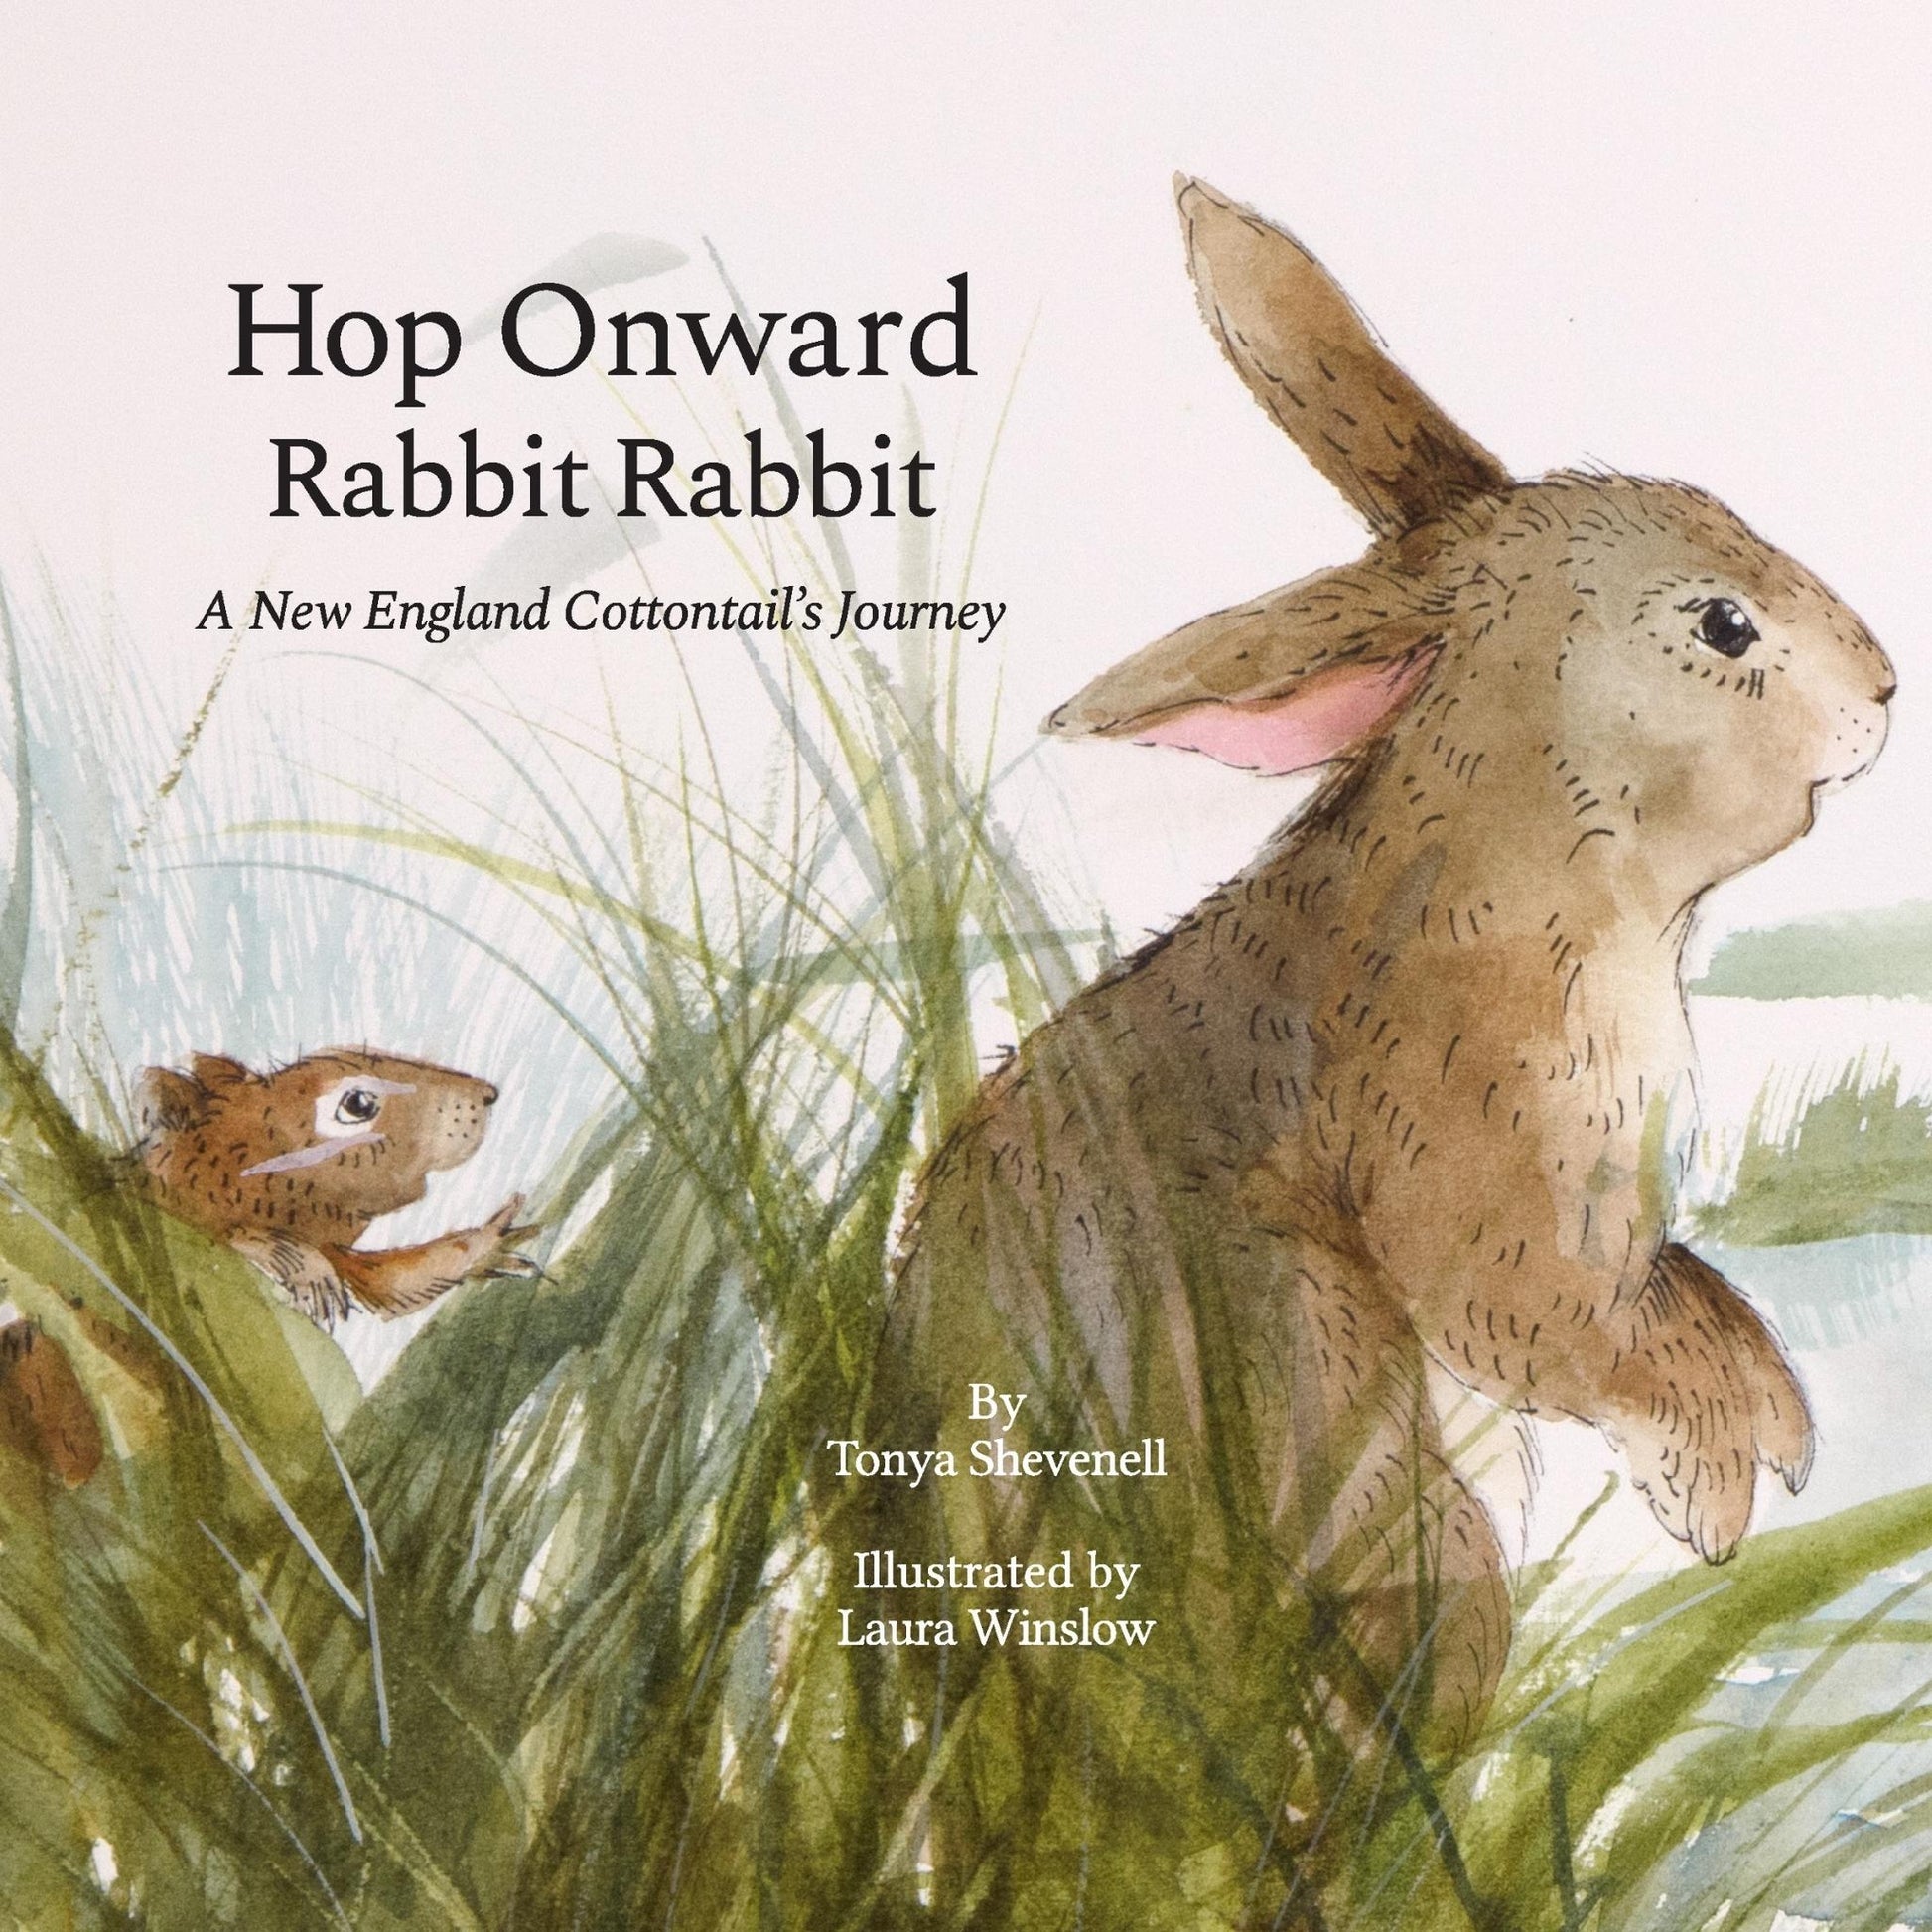 Book cover of Hop Onward Rabbit Rabbit A New England Cottontail's Journey by Tonya Shevenell and Laura Winslow